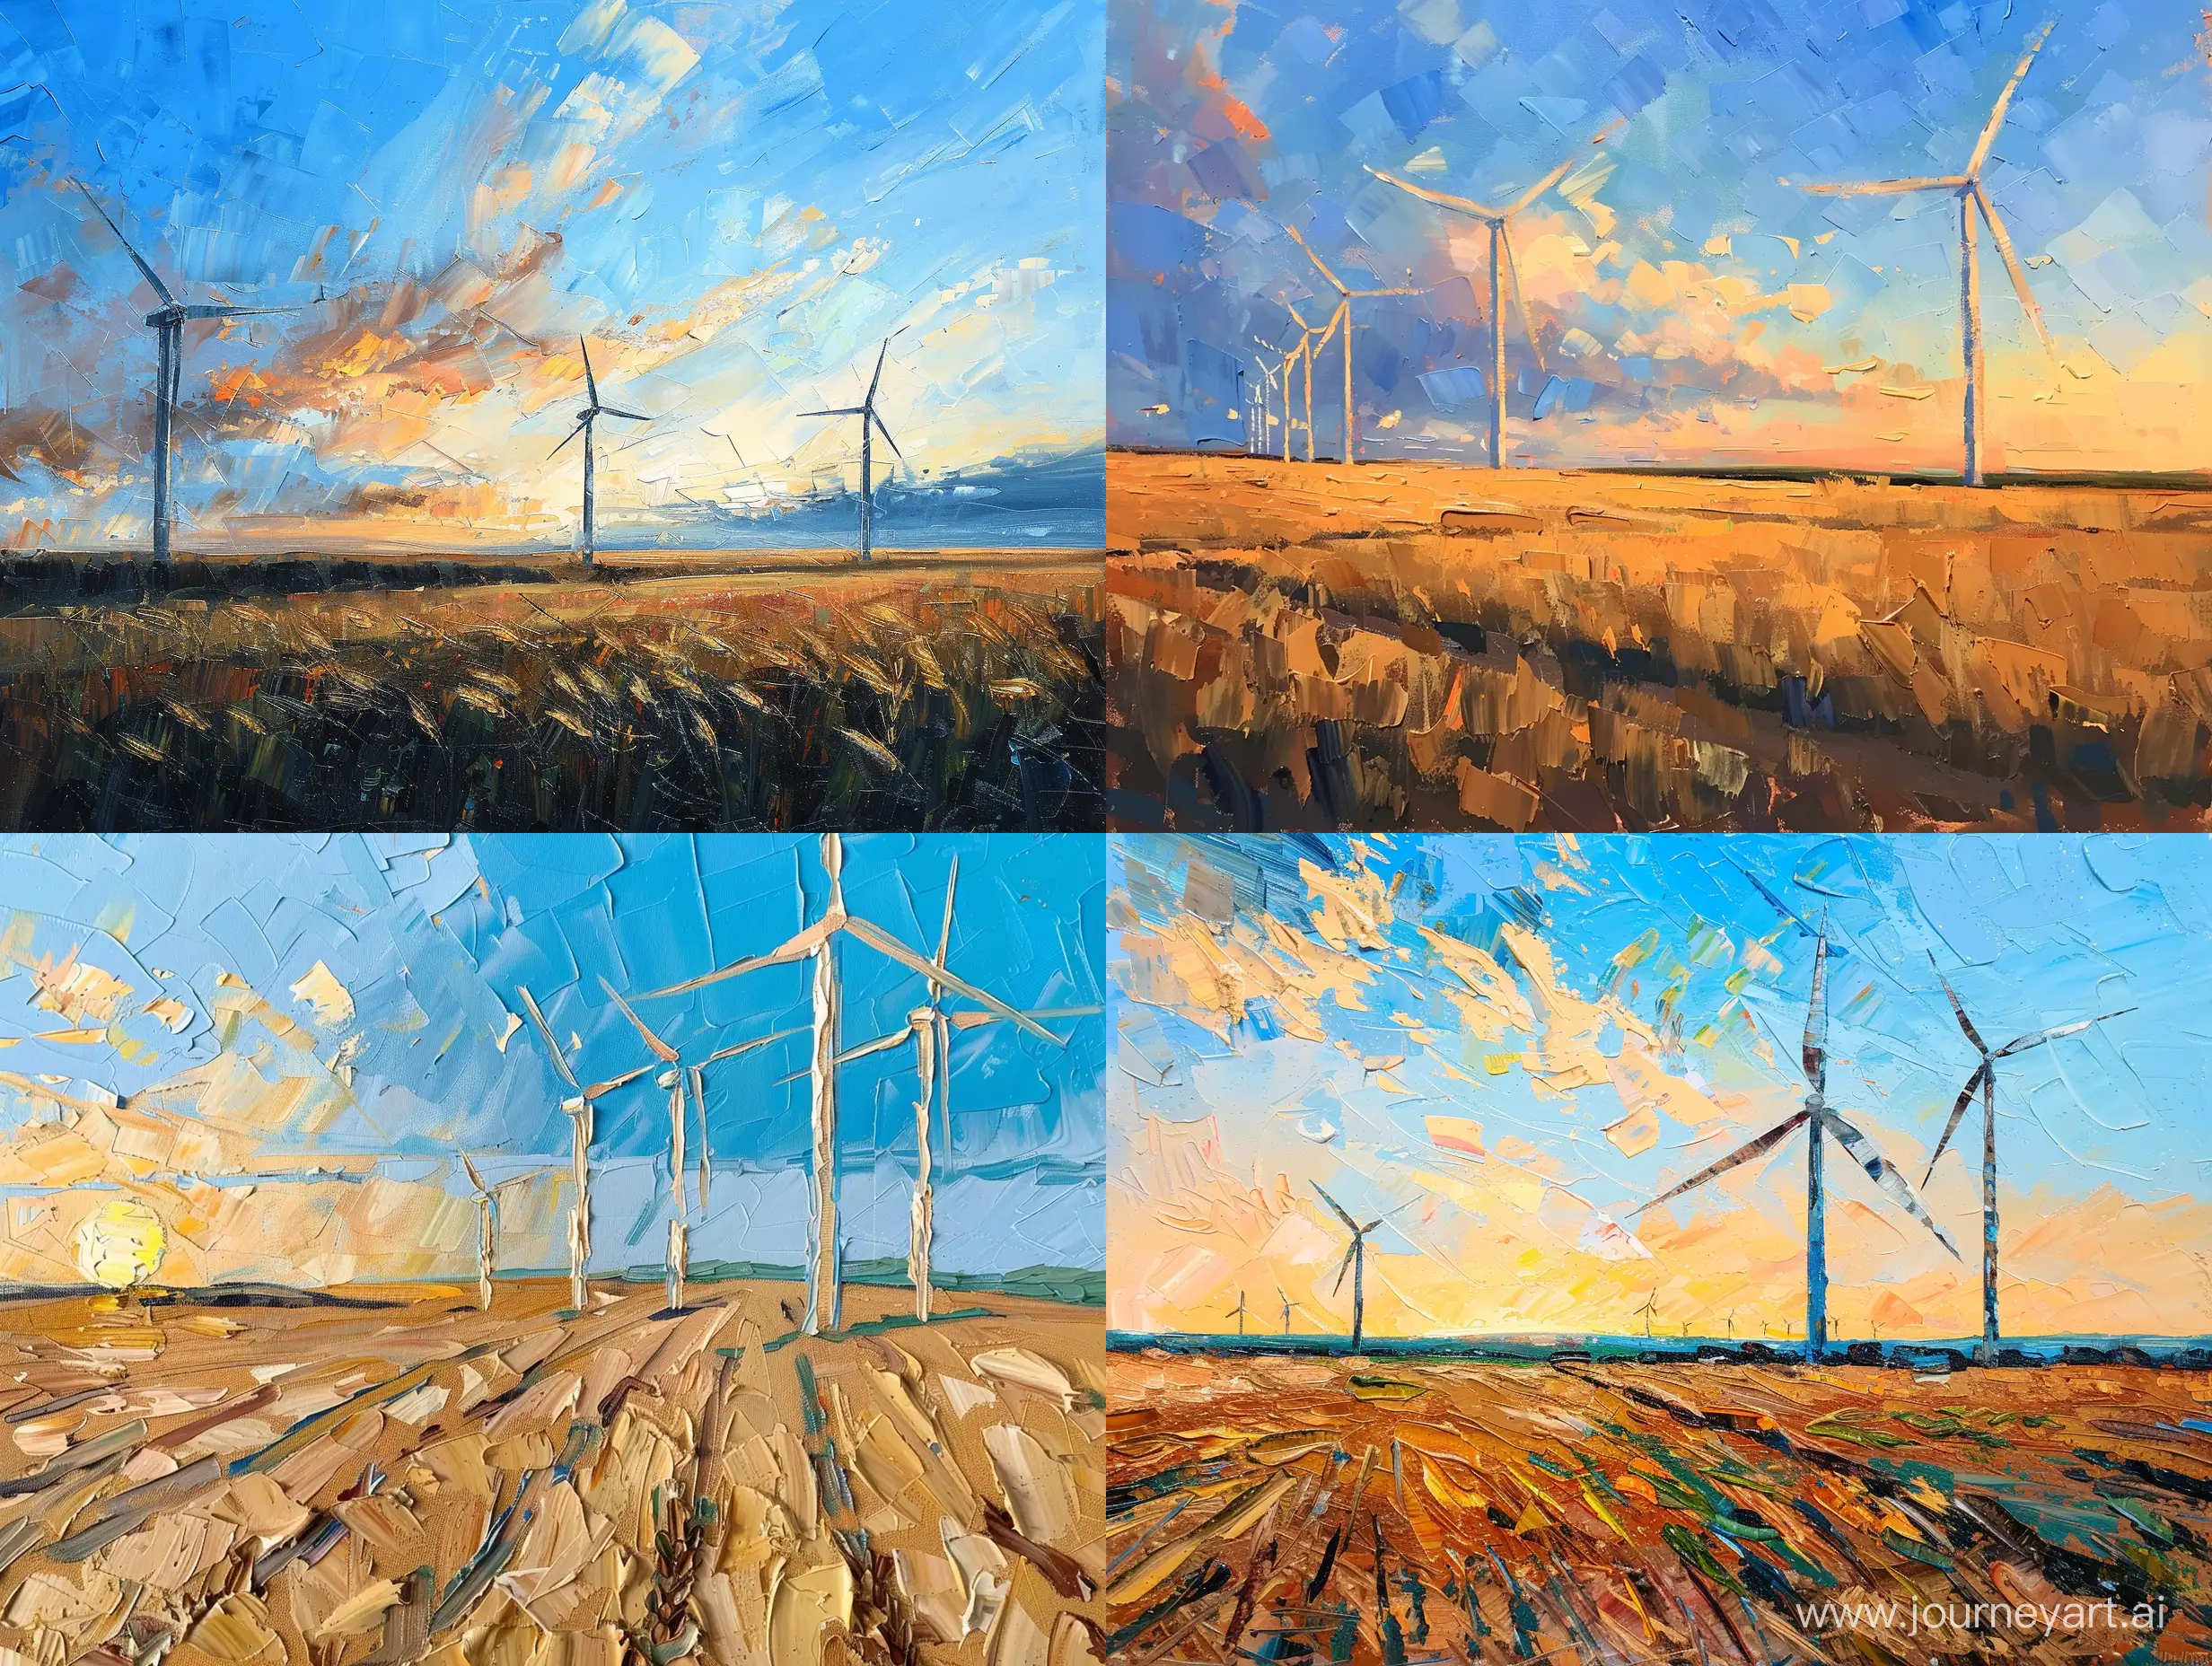 On the flat wheat field on the right there are wind turbines, against the backdrop of the sunset blue sky, oil painting style, small strokes, lissing